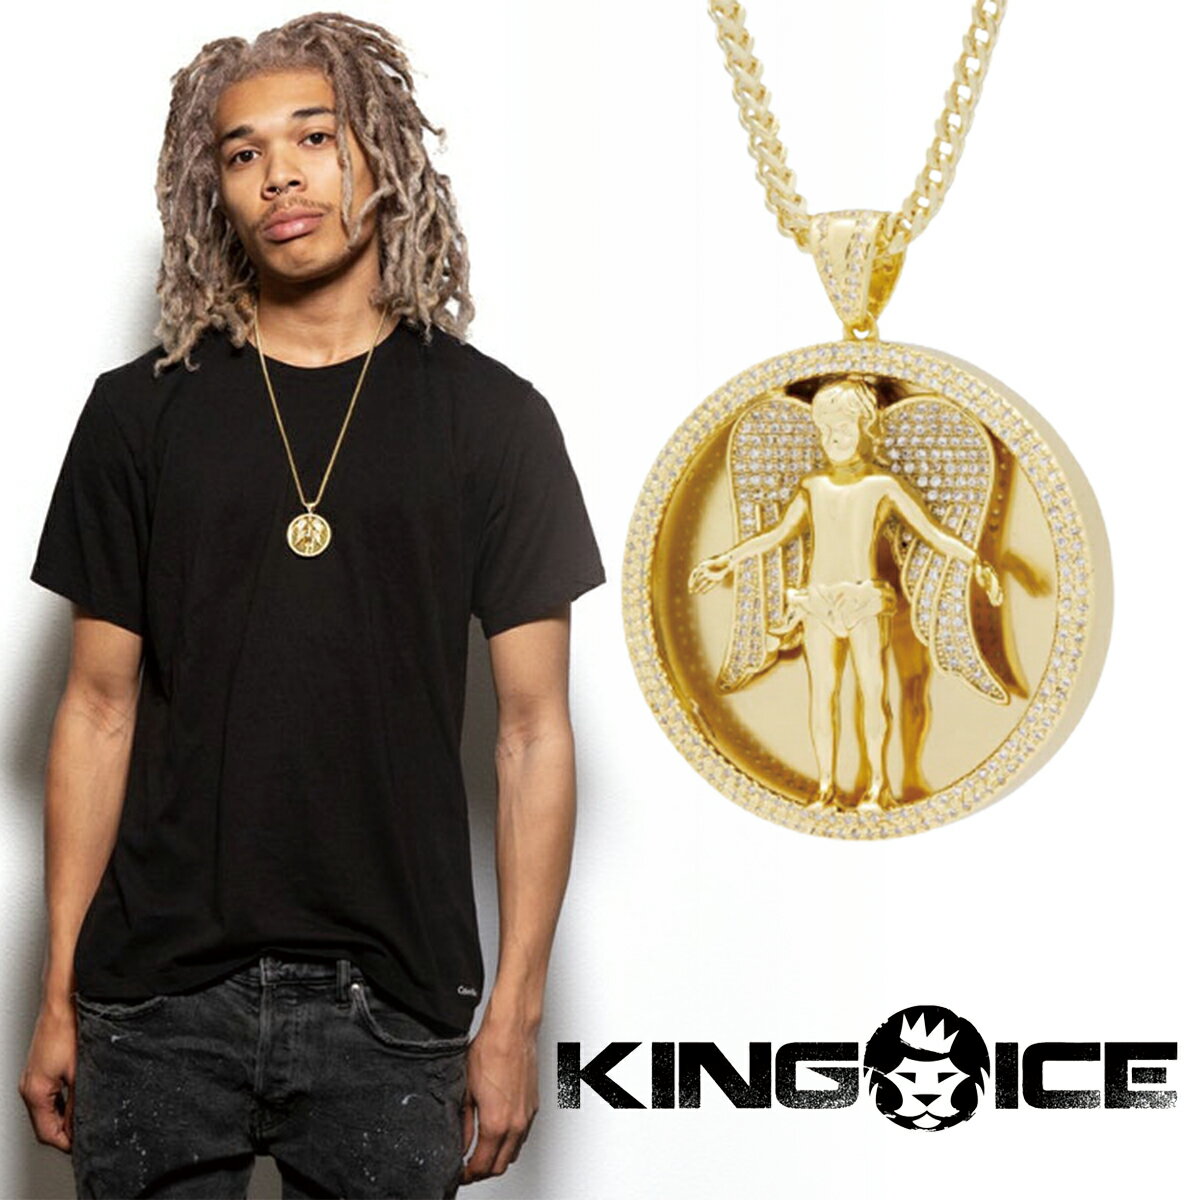 KING ICE LOACX lbNX `F[ ANGEL MEDALLION NECKLACE 14kS[h  WHITE GOLD lC[ANZT[]